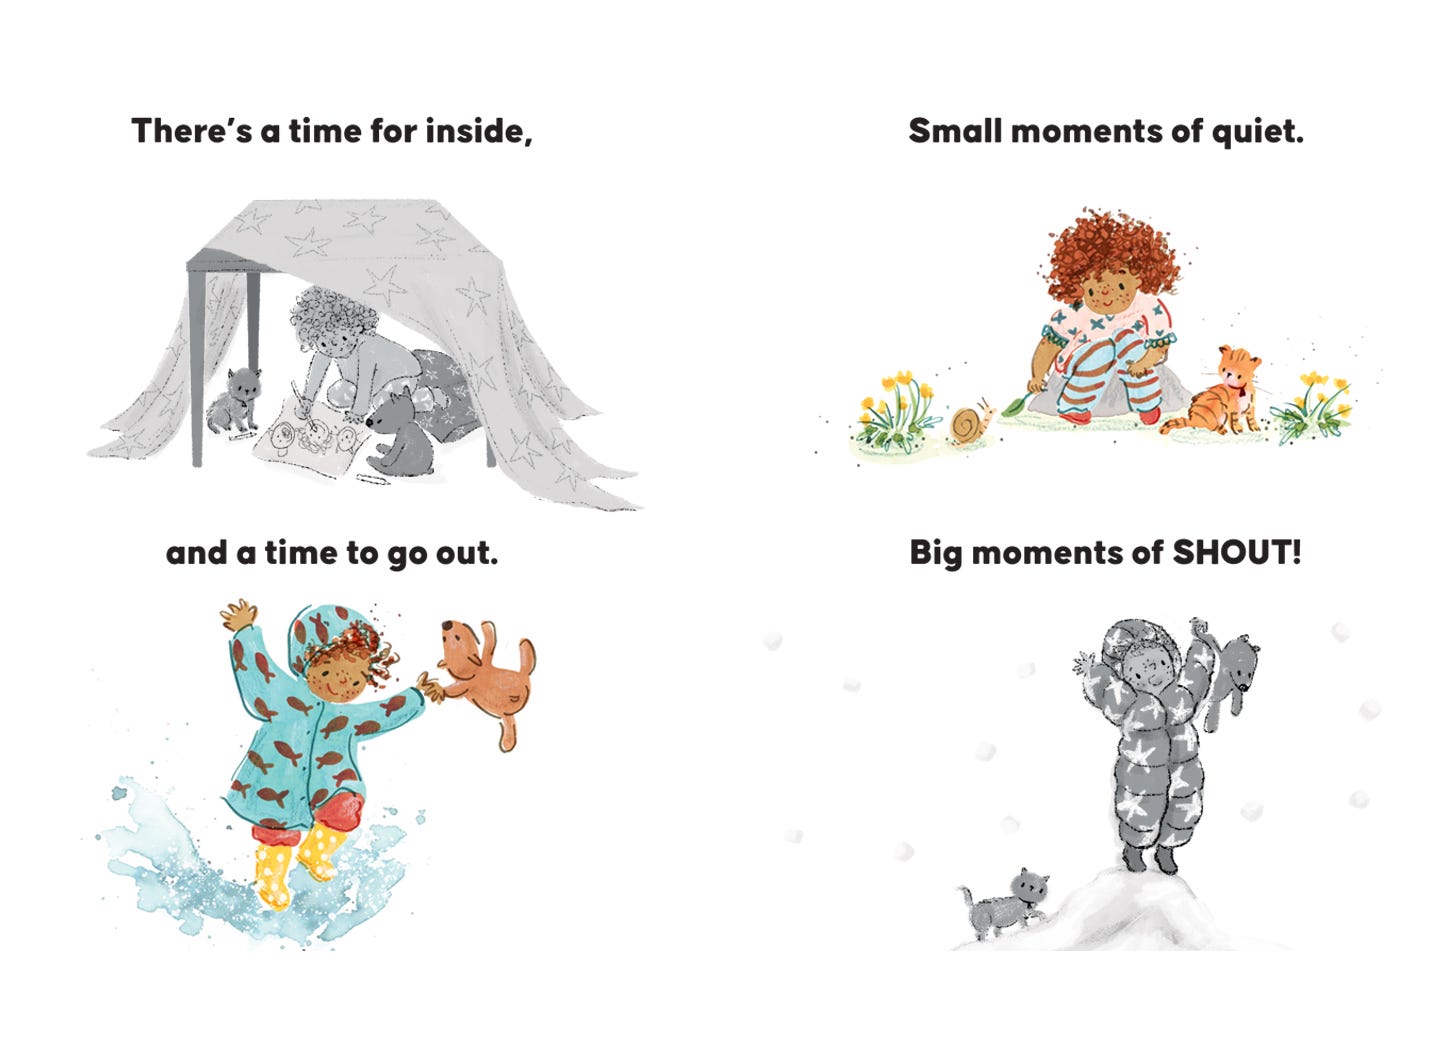 four spot illustrations from It's Your Time to Shine board book by Dianne White. Illustrations show a young girl and her cat. Text reads There's a time for inside, and a time to go out. Small moments of quiet, big moments of shout!